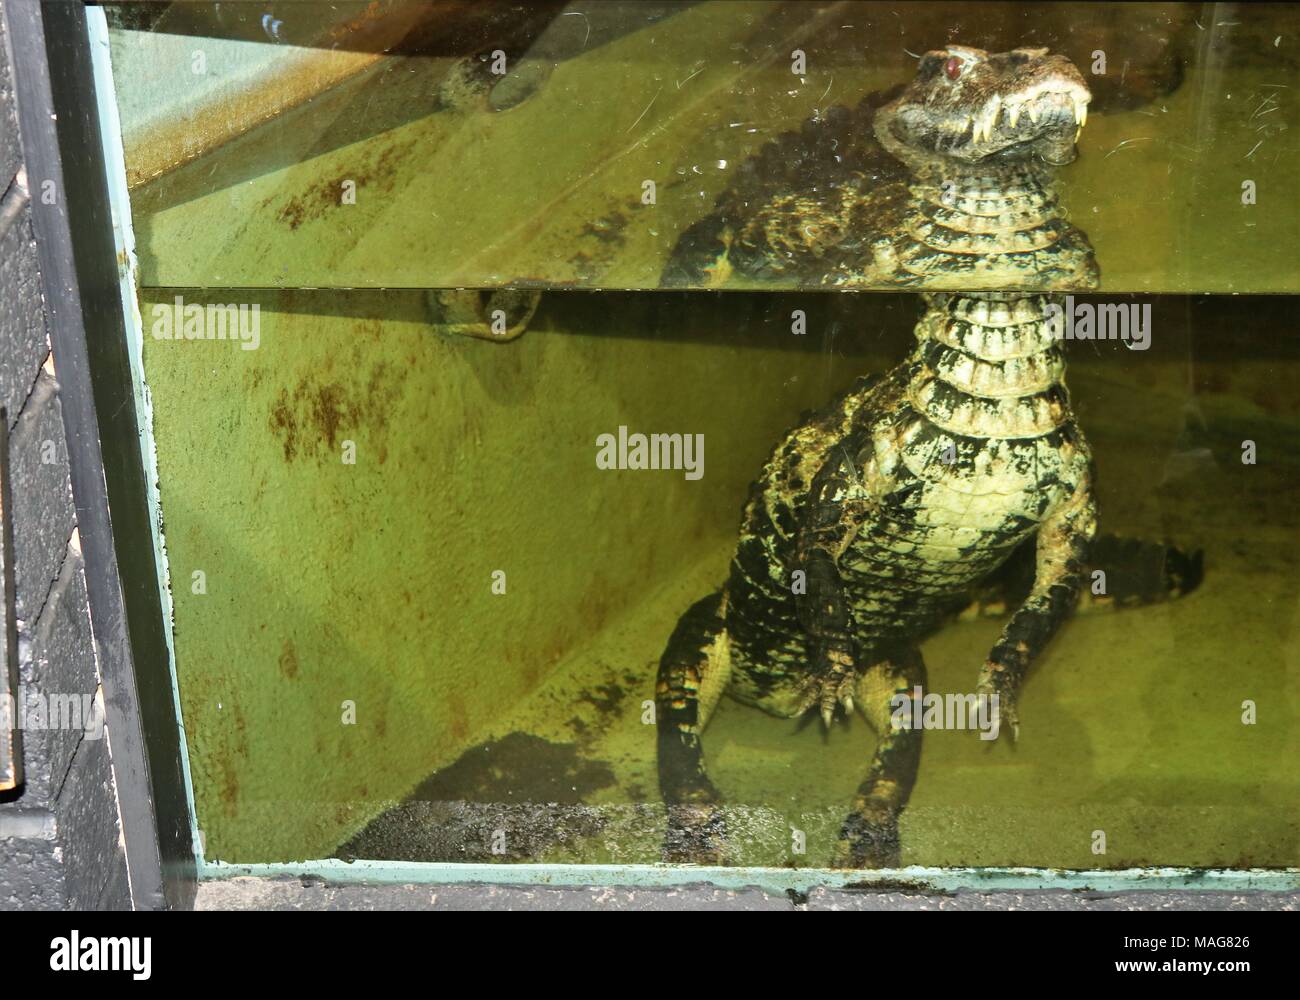 Smooth-fronted caiman half submerged in water at a tourist attraction Stock Photo